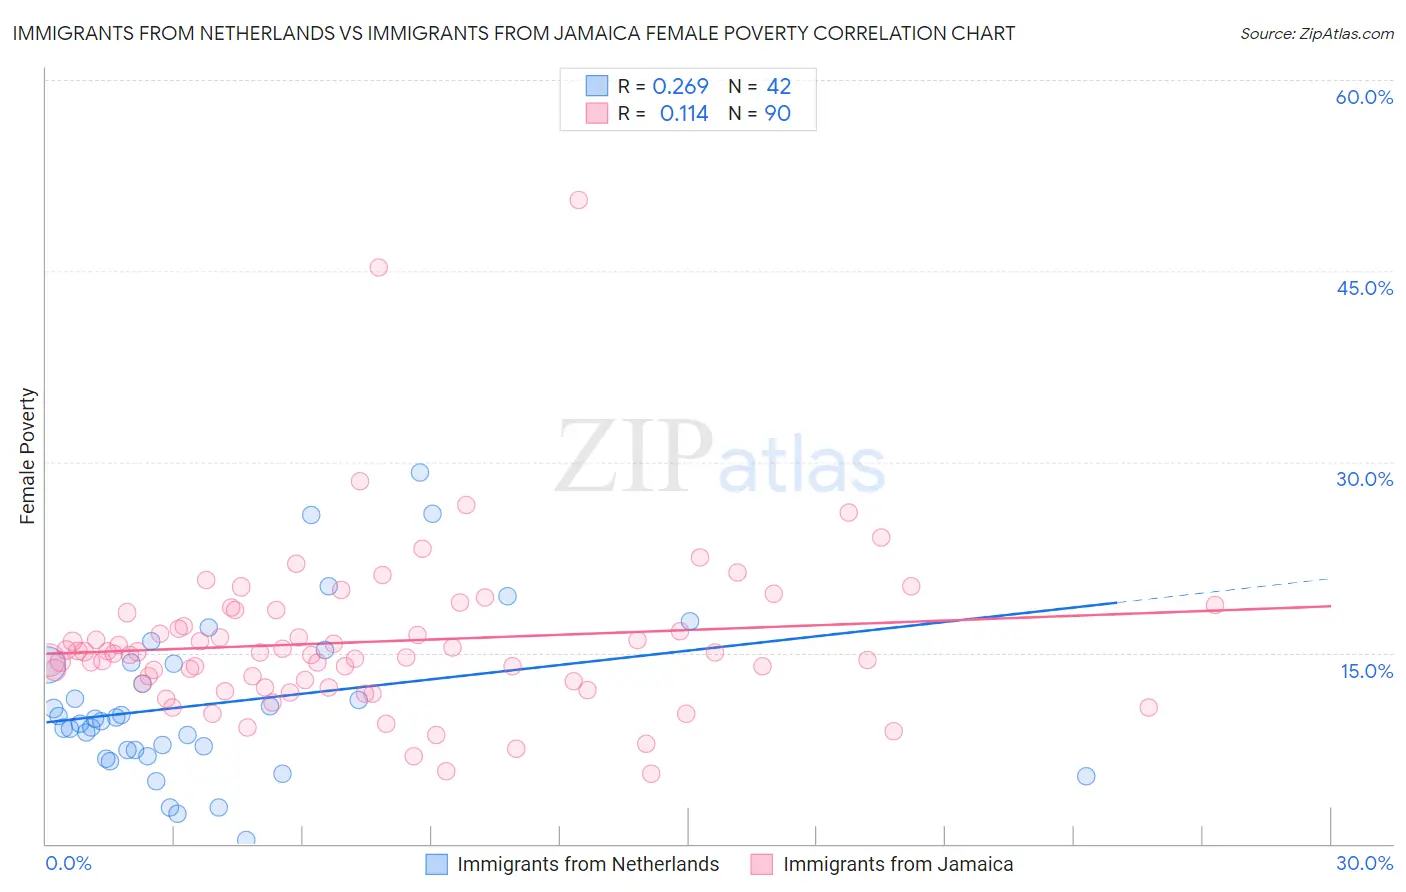 Immigrants from Netherlands vs Immigrants from Jamaica Female Poverty